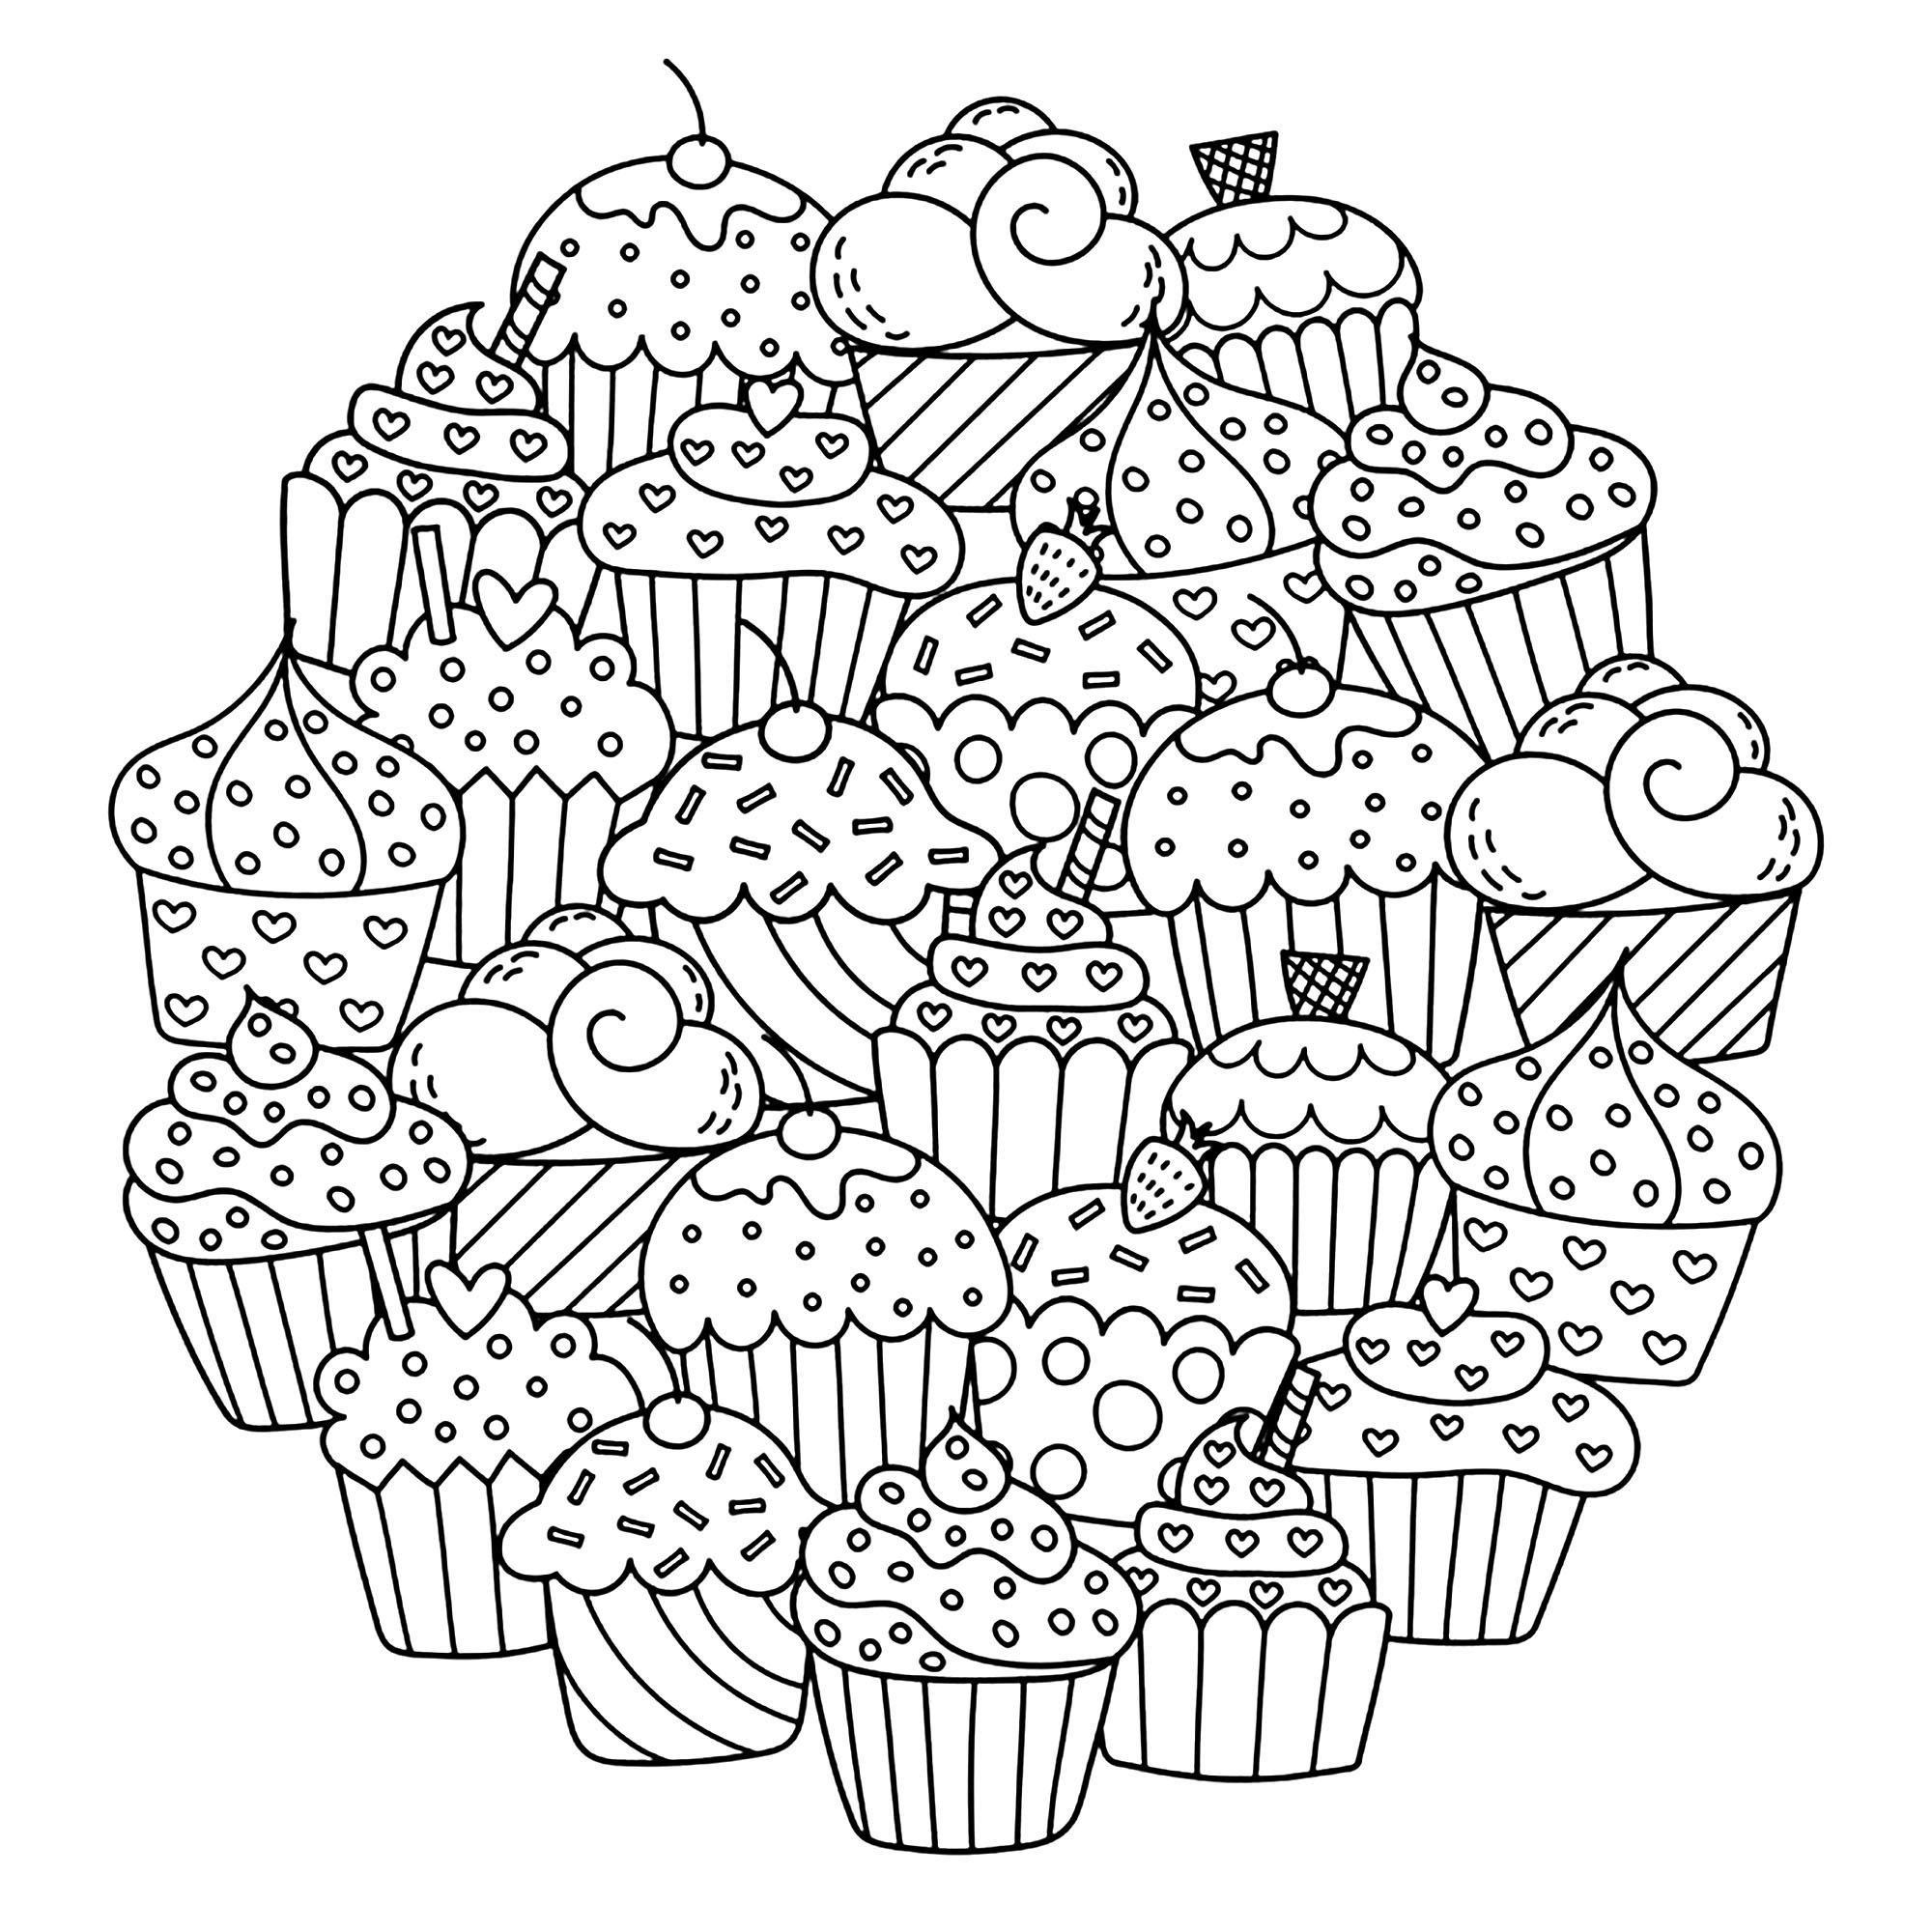 A magnificent Mandala full of little cupcakes, just waiting for your colors !, Artist : Gulnara Sabirova   Source : 123rf